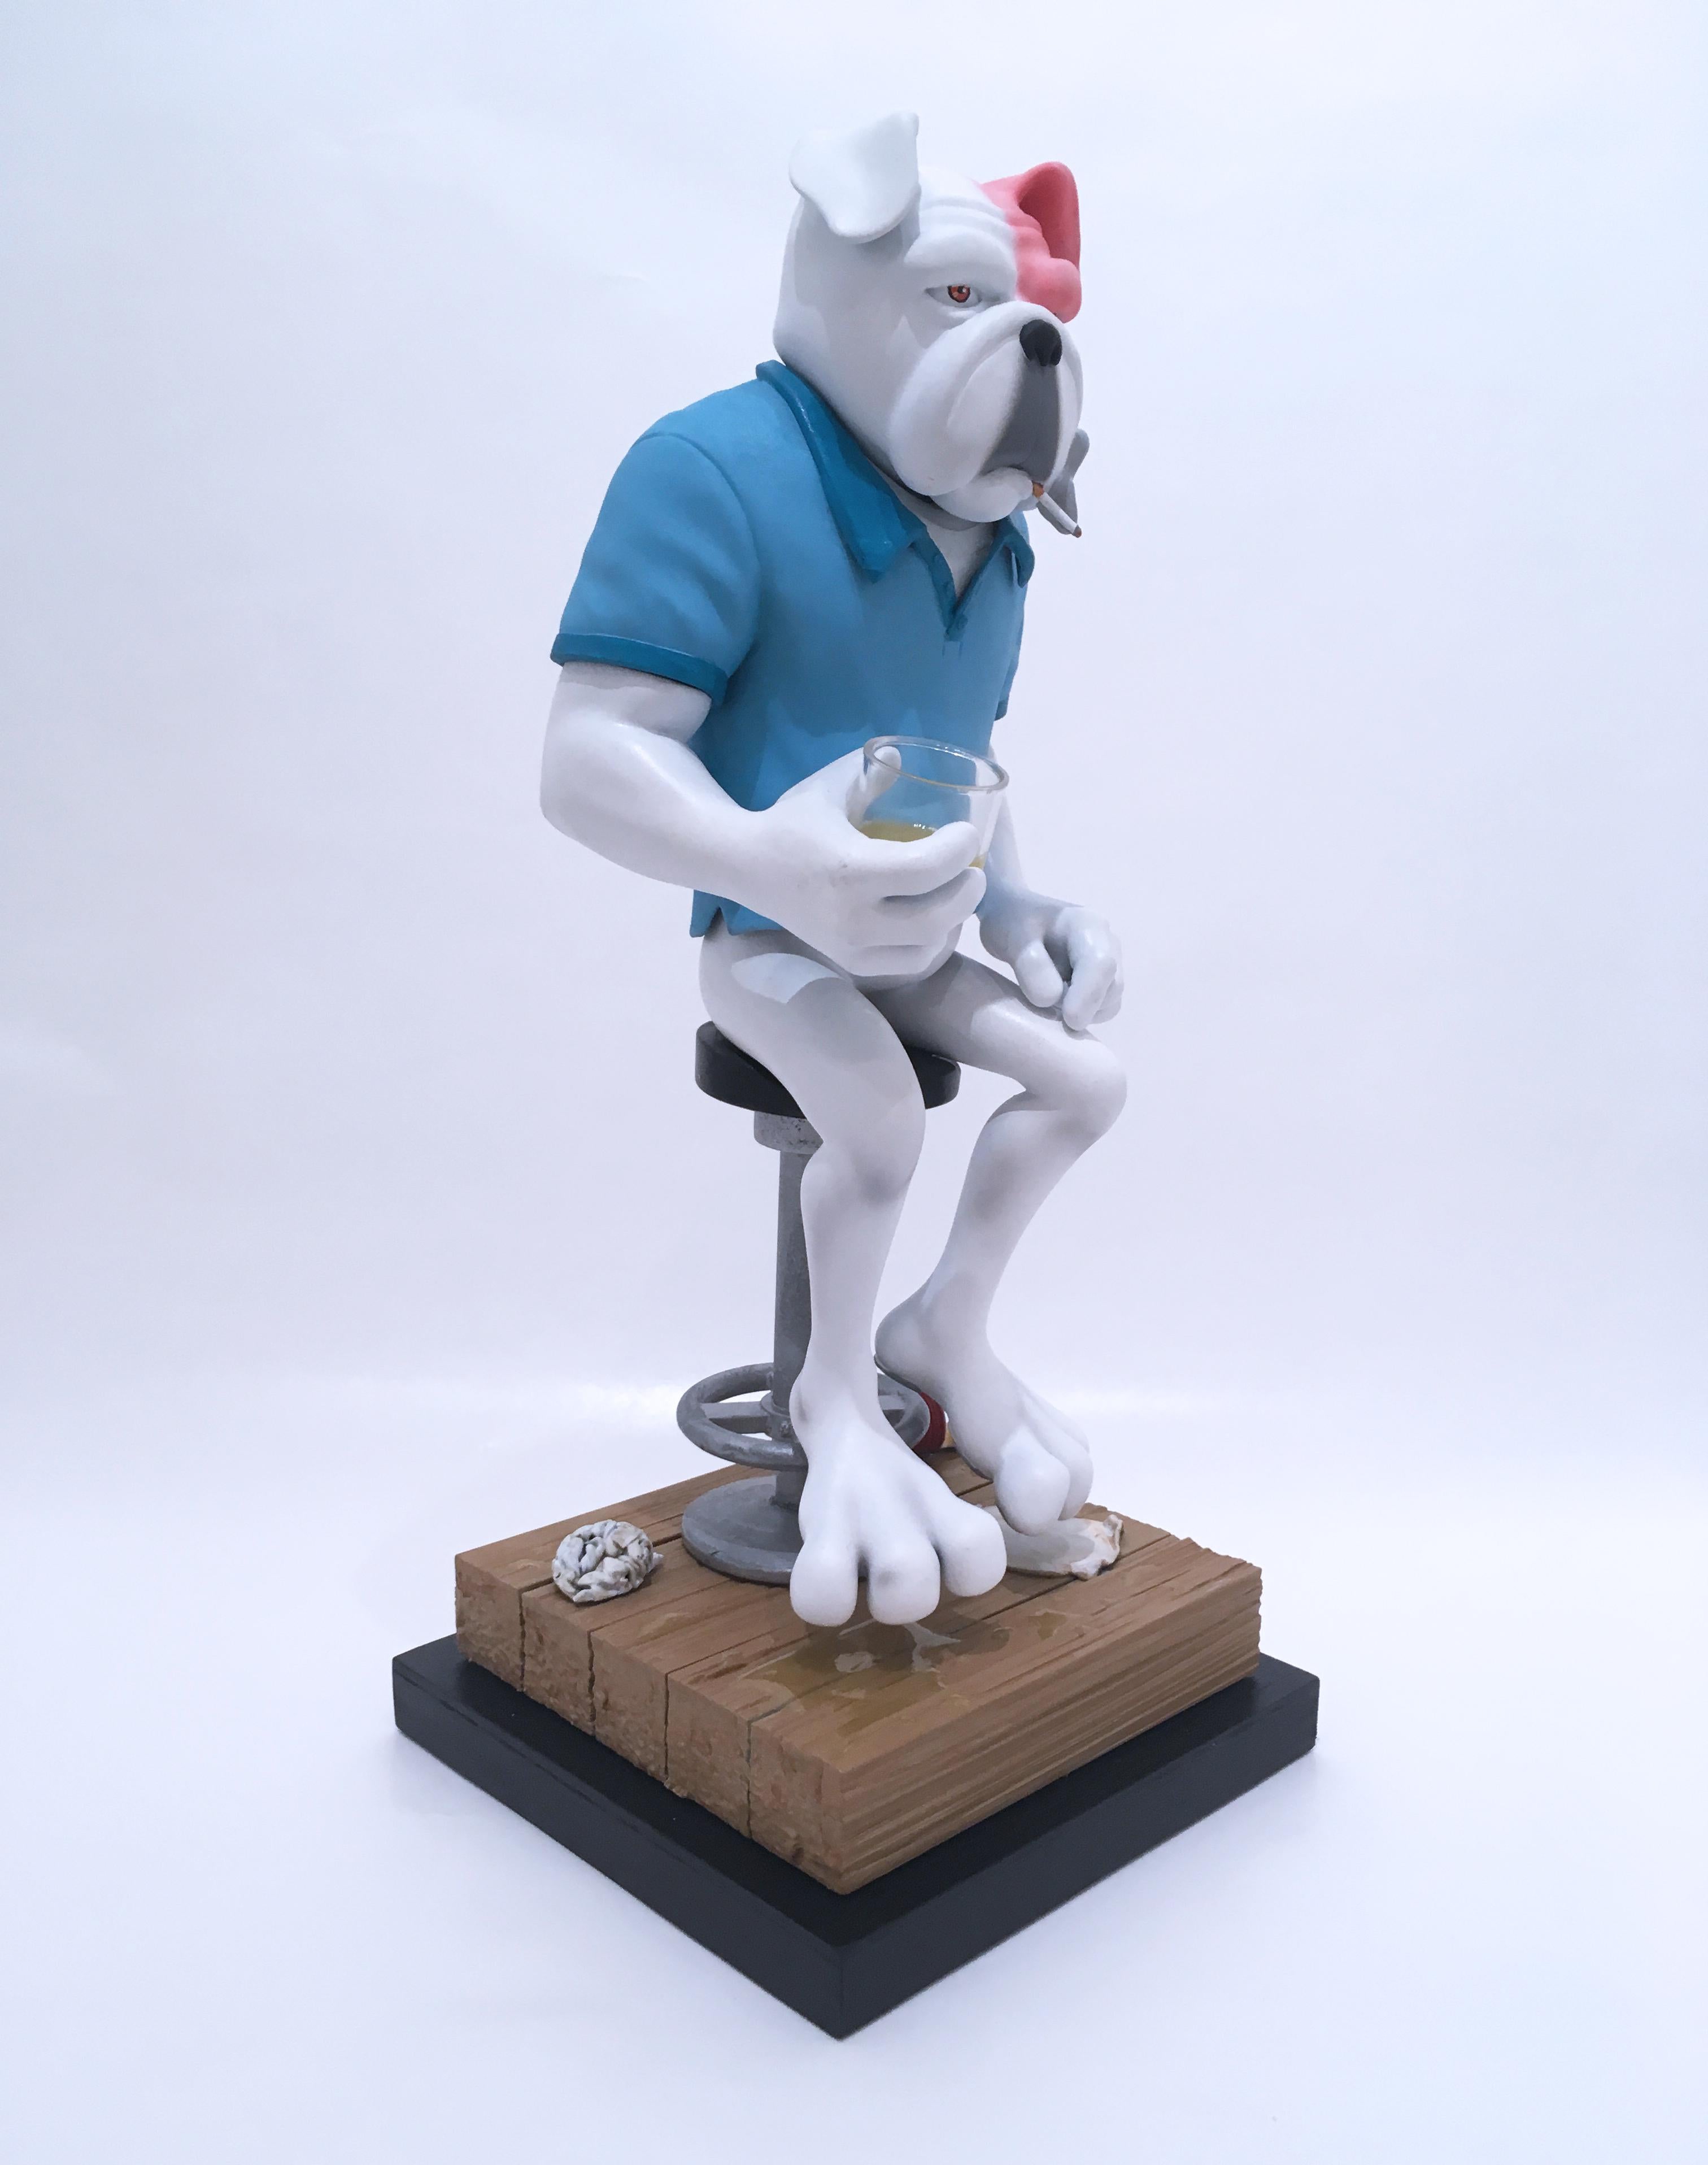 Frank's Happy Hour I by Concrete Jungle, 3-D printed pop art bull dog sculpture

3d sculptural modeling followed by 3d sculpture printing, a resin based sculpture hand painted with airbrush acrylic paint, mounted on wood base.  The character 